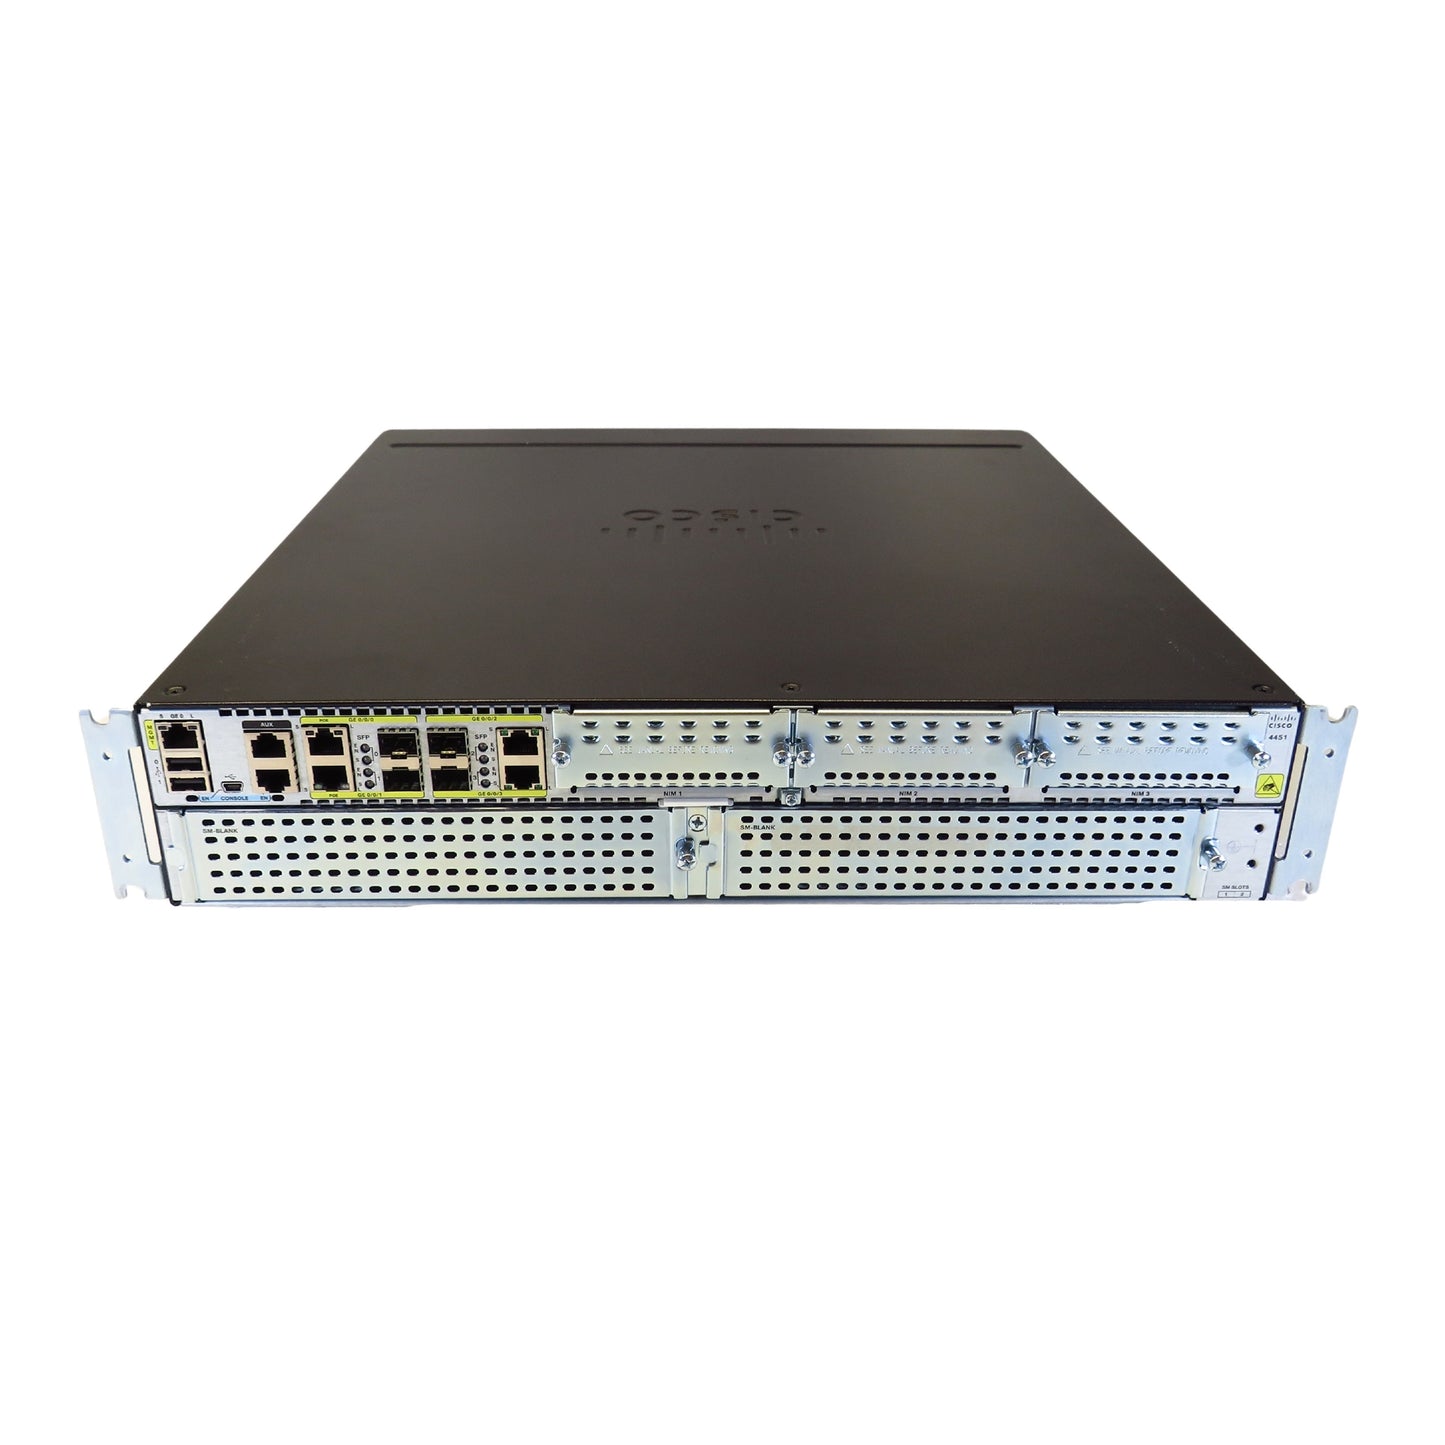 Cisco ISR4451-X/K9 ISR 4451 with 4 Onboard GE Integrated Services Router (Refurbished)